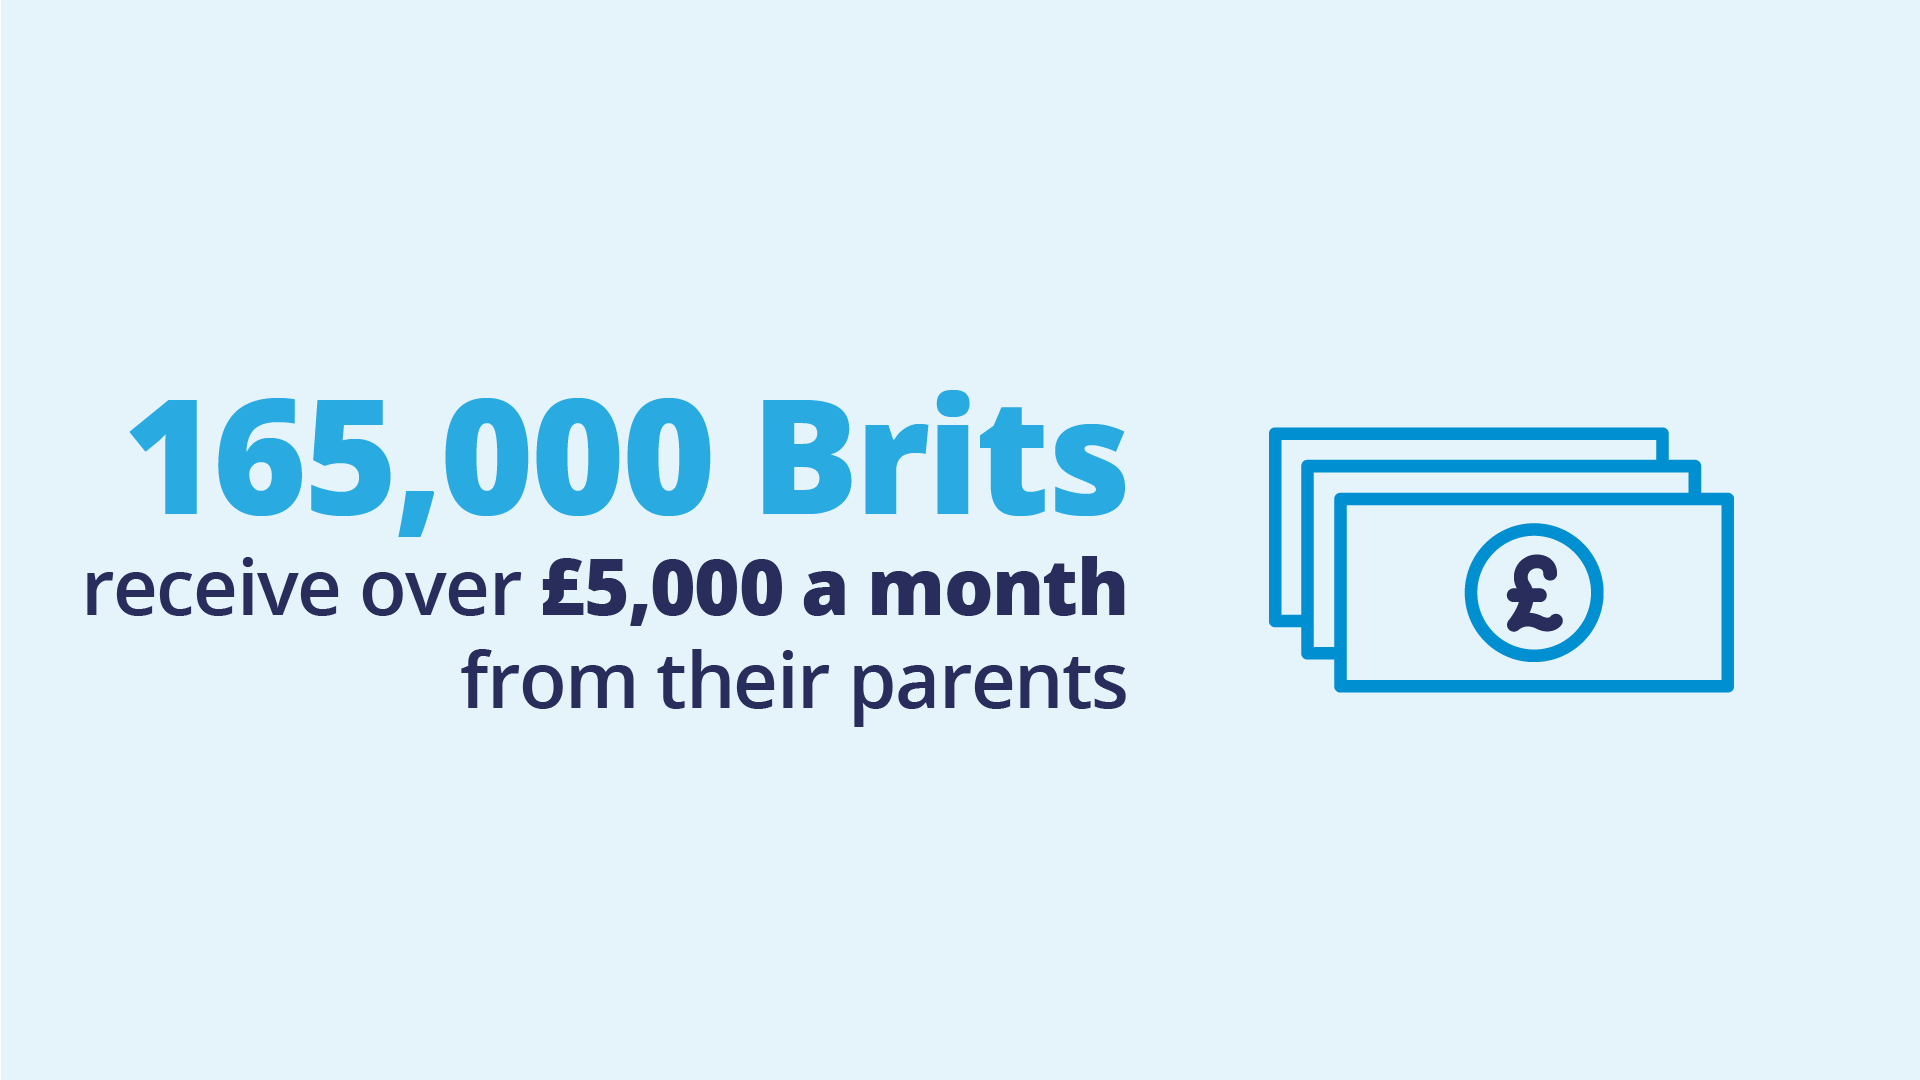 Brits received over £5,000 a month from their parents